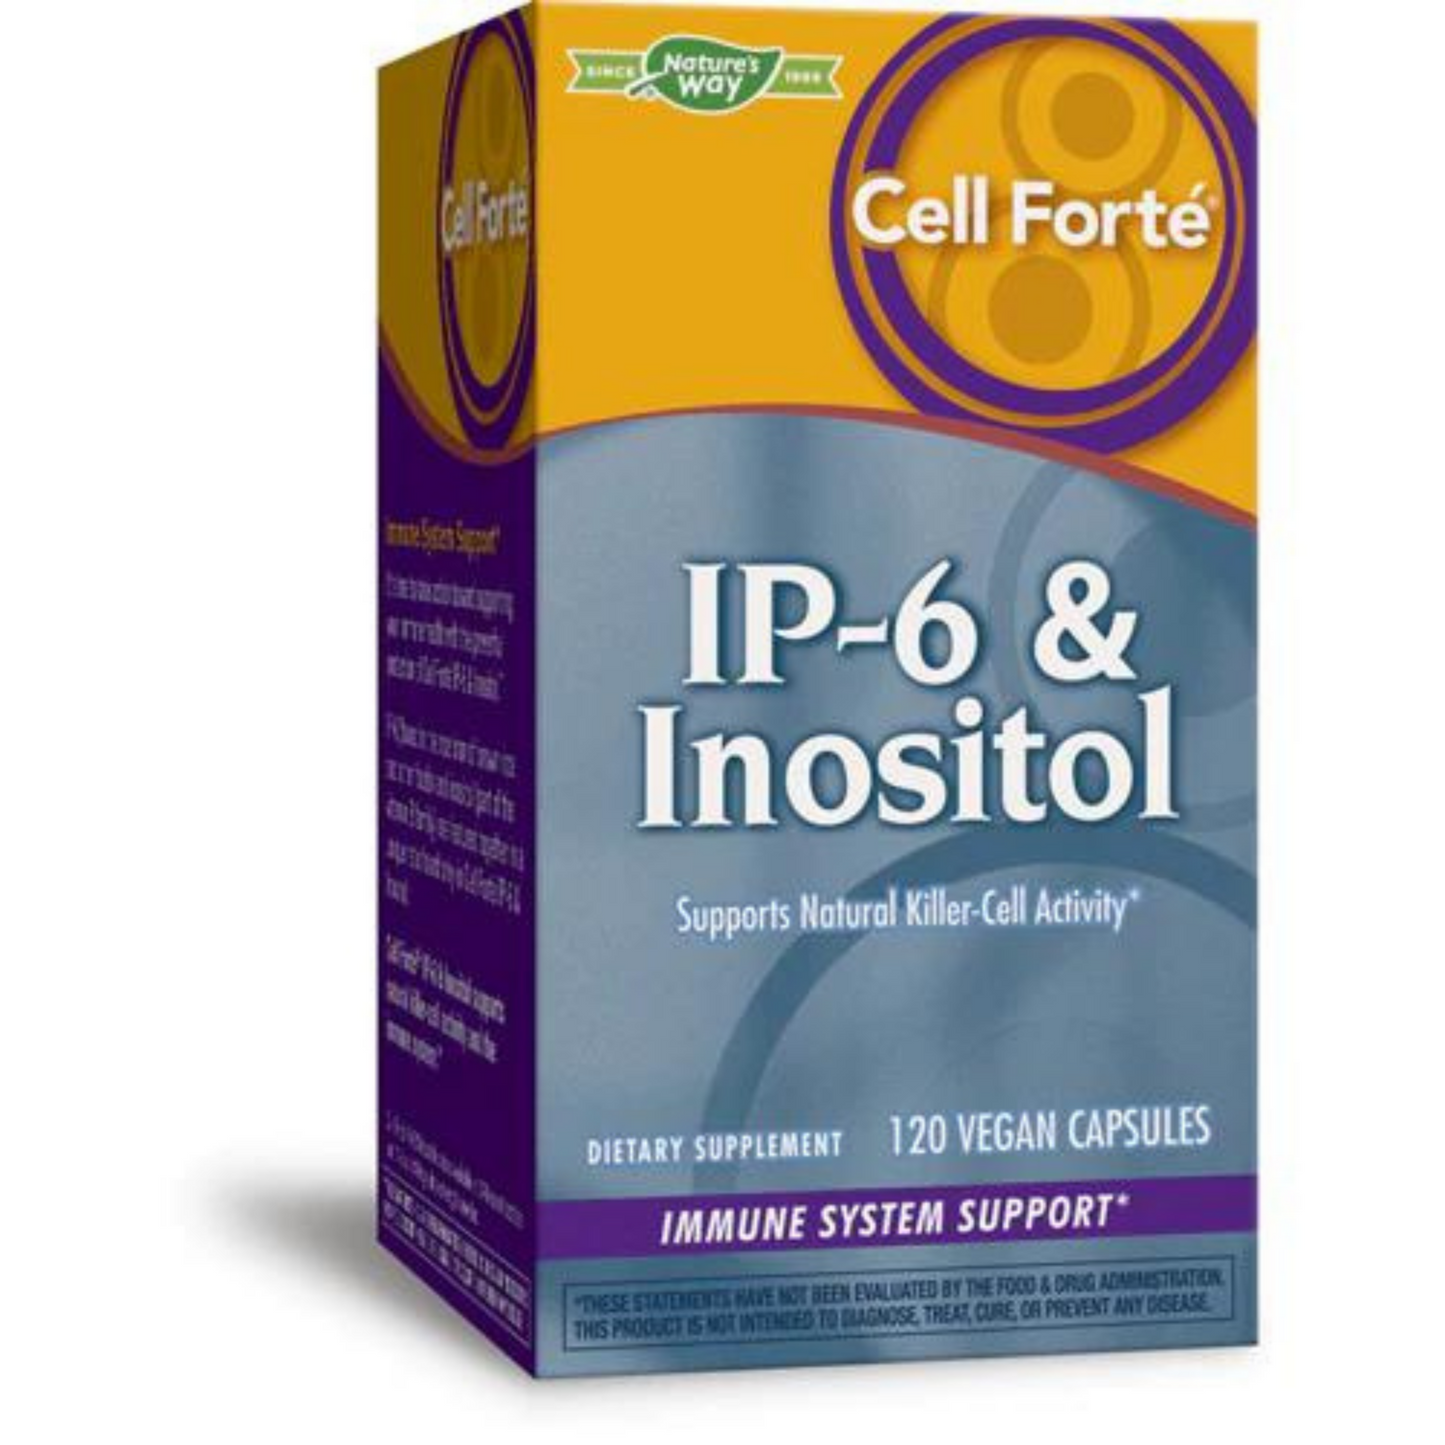 Primary image of Cell Forte W/Ip-6